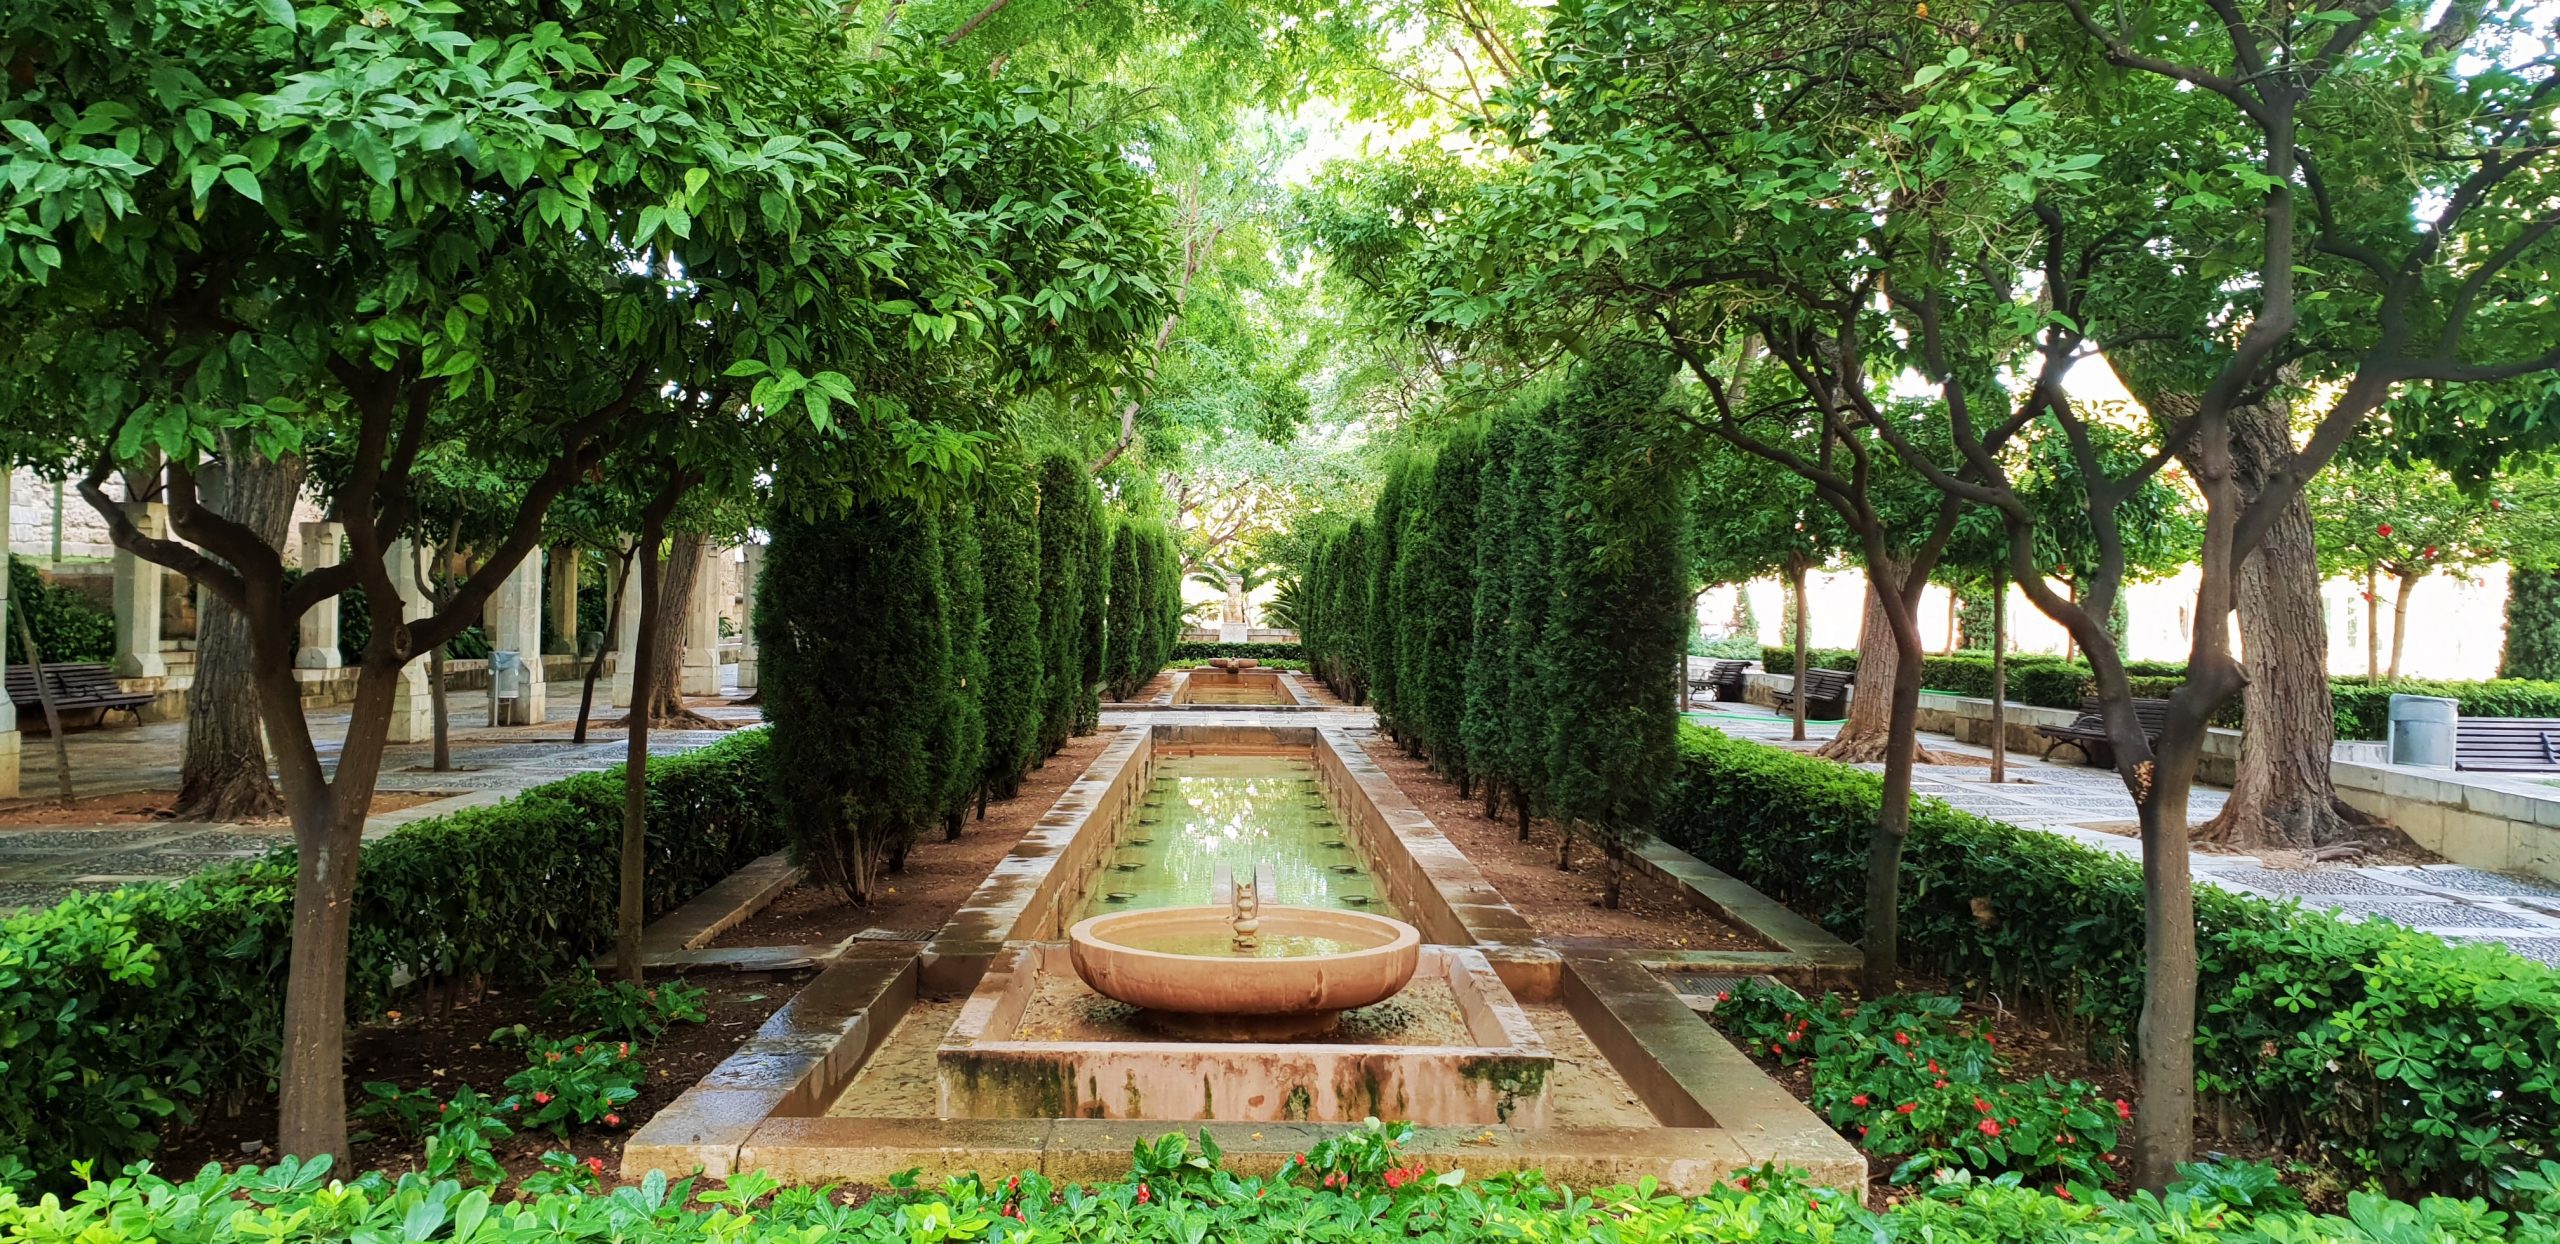 Fountain at Hort del Rei Gardens by the Royal Palace of La Almudaina